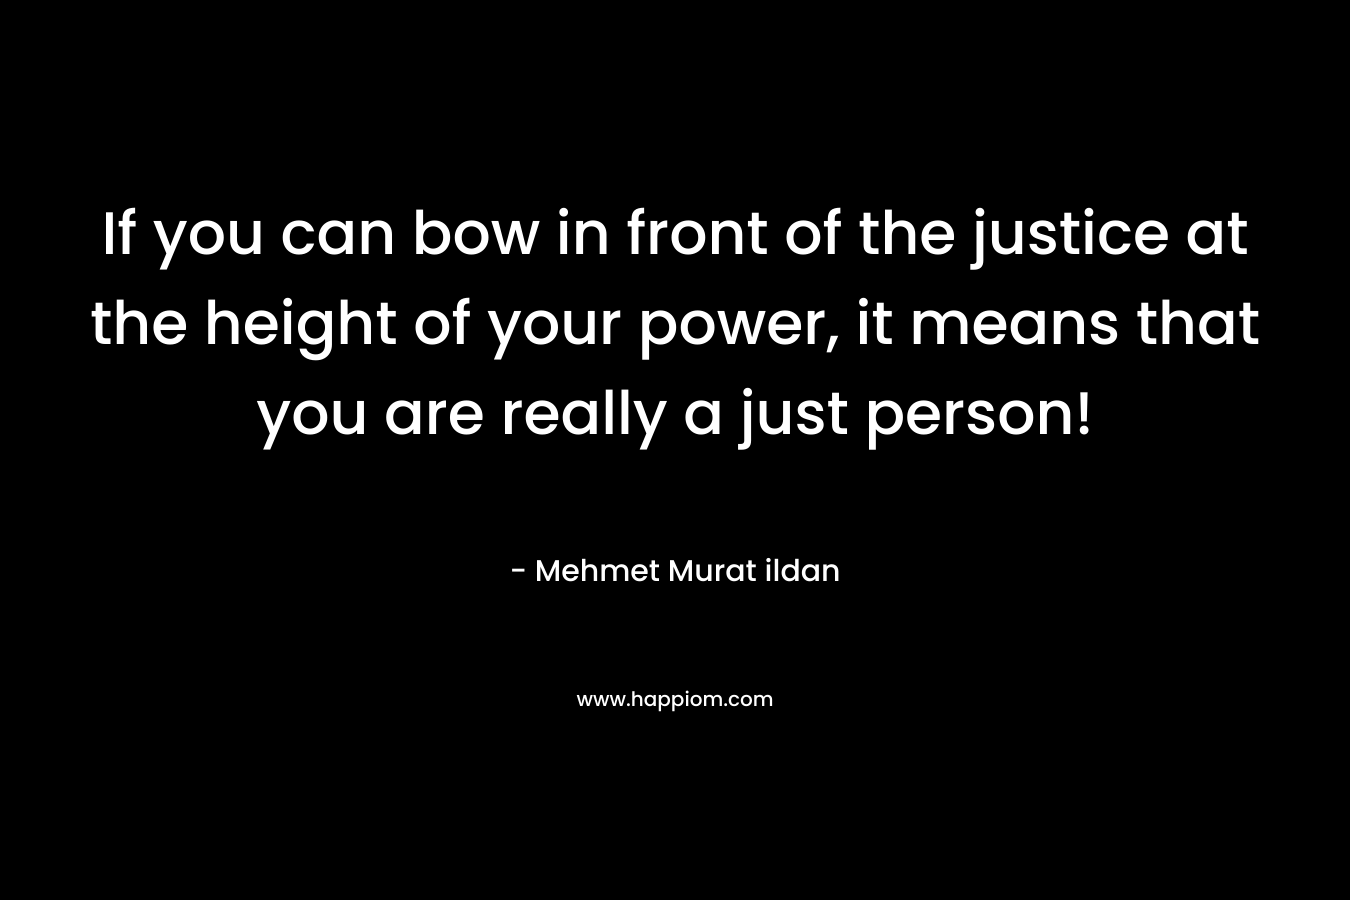 If you can bow in front of the justice at the height of your power, it means that you are really a just person! – Mehmet Murat ildan